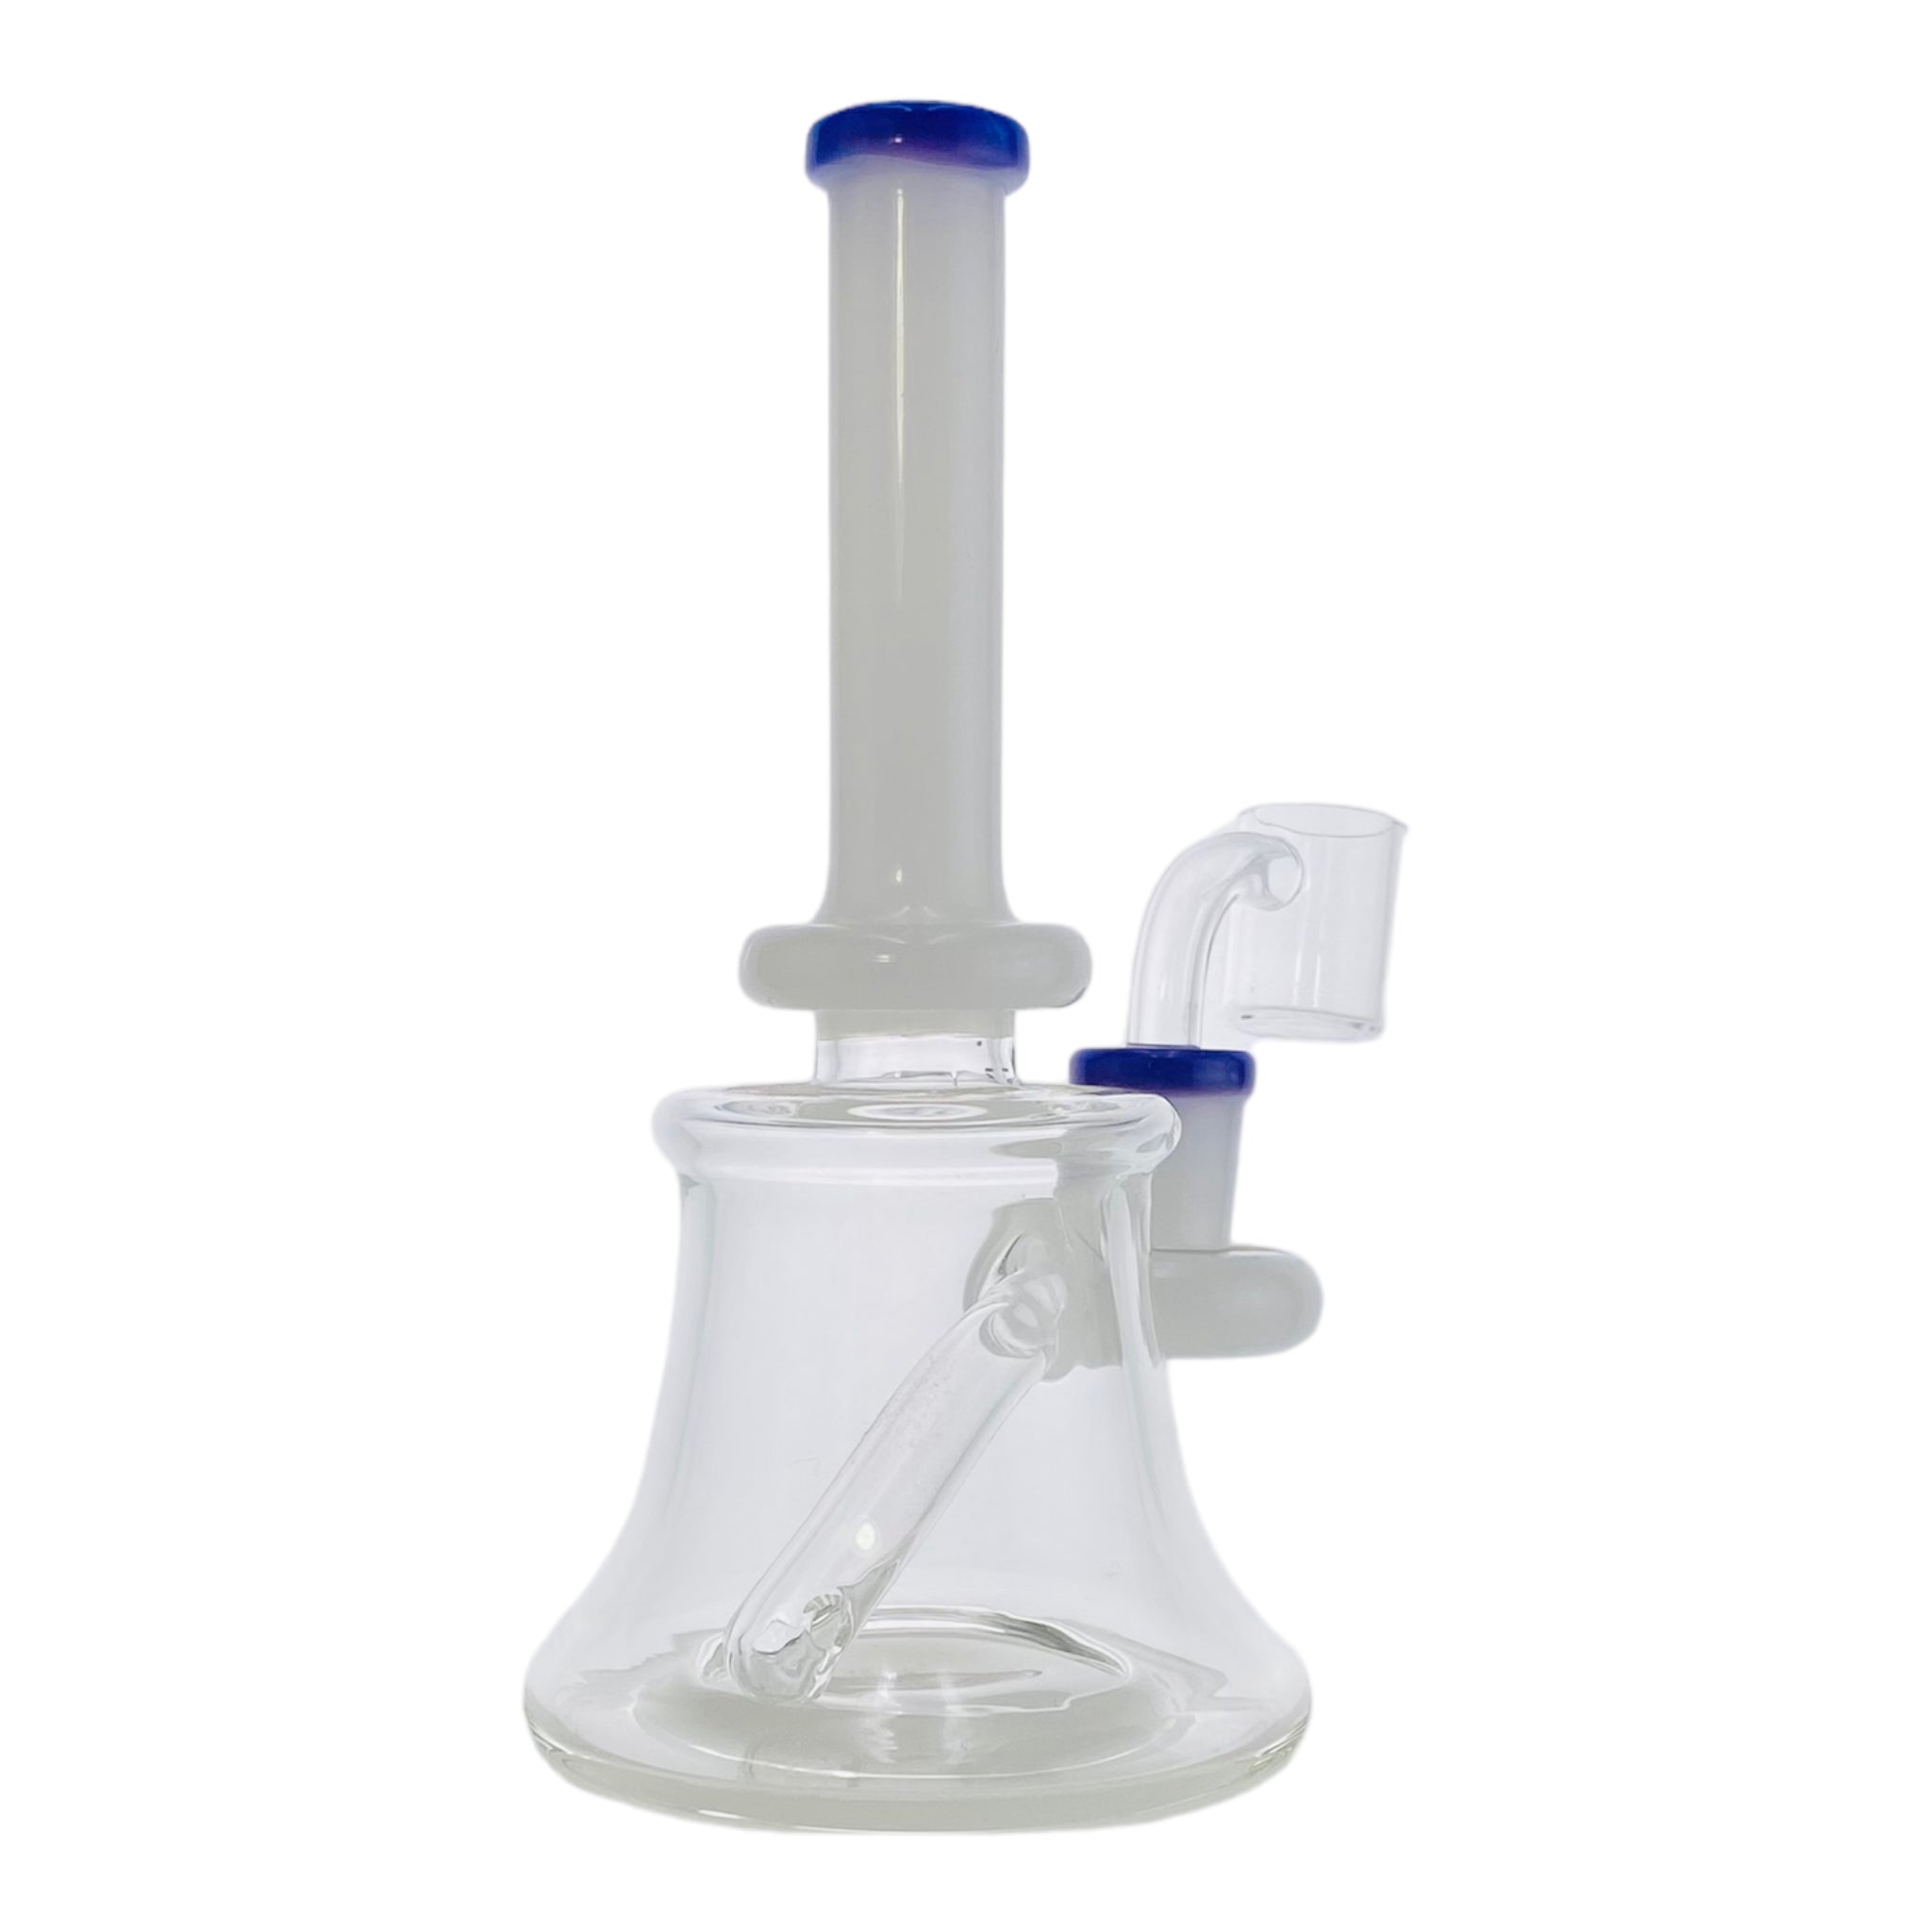 This mini tube dab rig features a white neck and fitting with a stunning purple trim. It stands 7" tall and includes a 14mm banger hanger fitting and 14mm quartz banger, making it ideal for both wax and oil concentrates